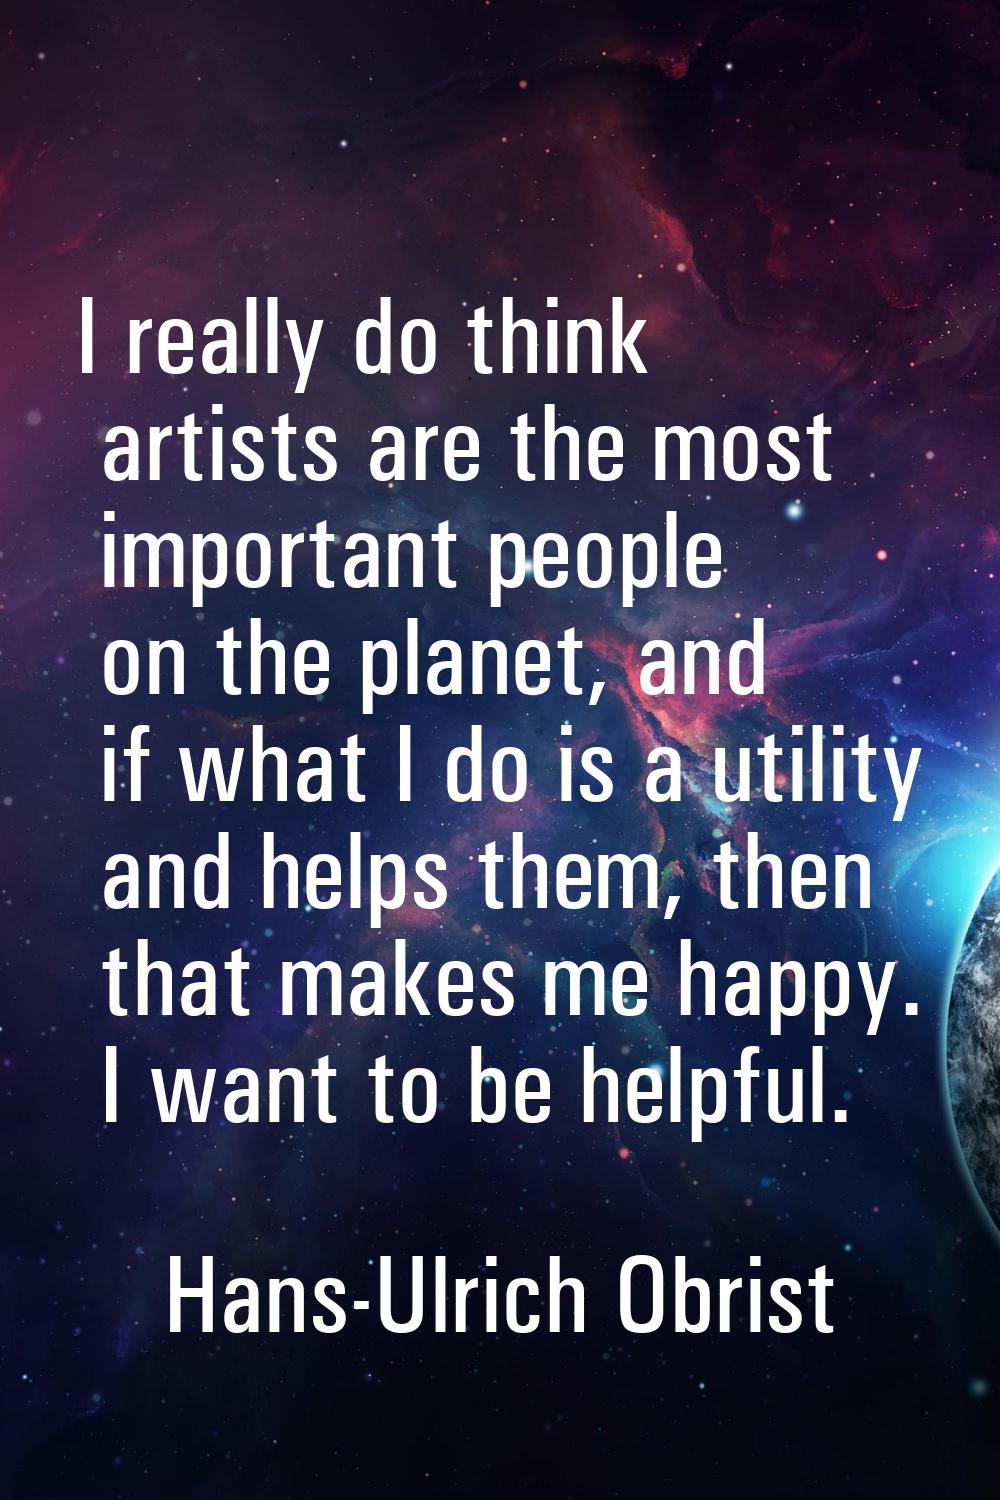 I really do think artists are the most important people on the planet, and if what I do is a utilit